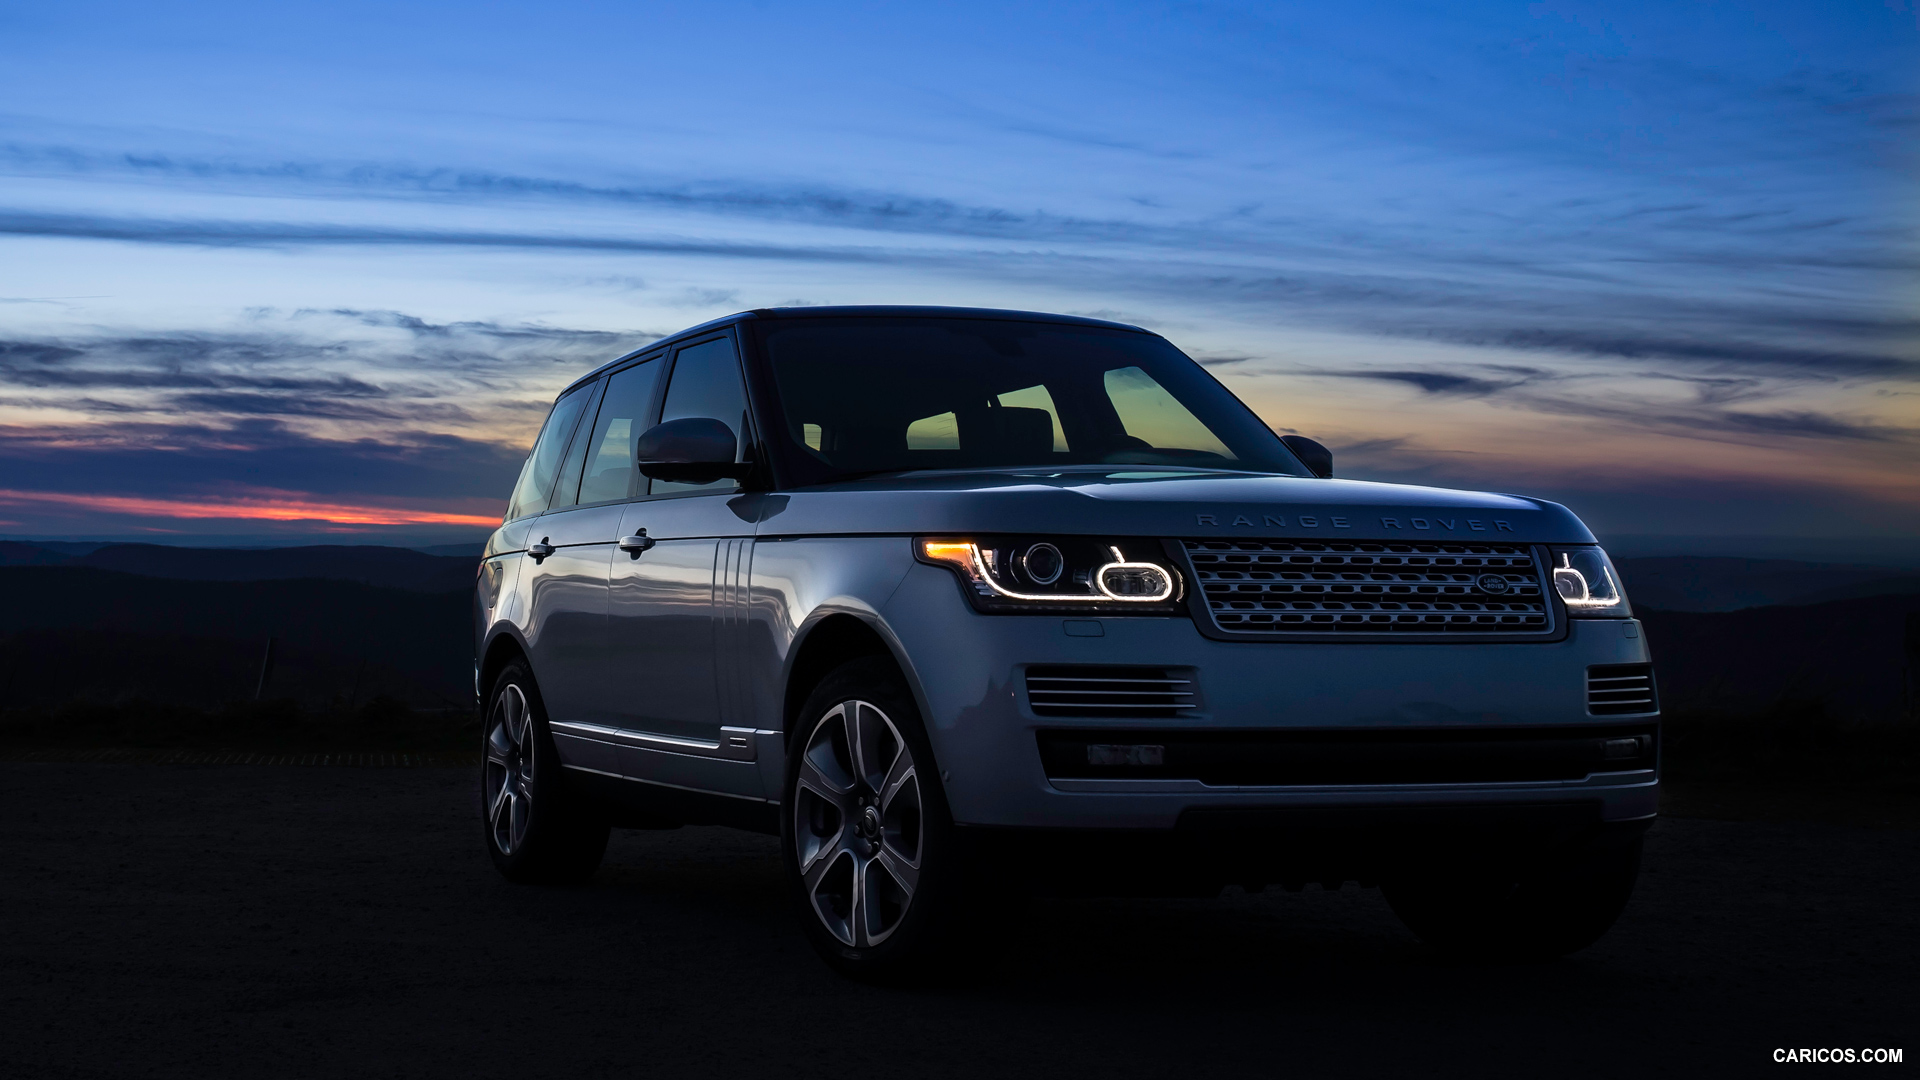 HD Quality Wallpaper | Collection: Vehicles, 1920x1080 2015 Land Rover Range Rover Hybrid